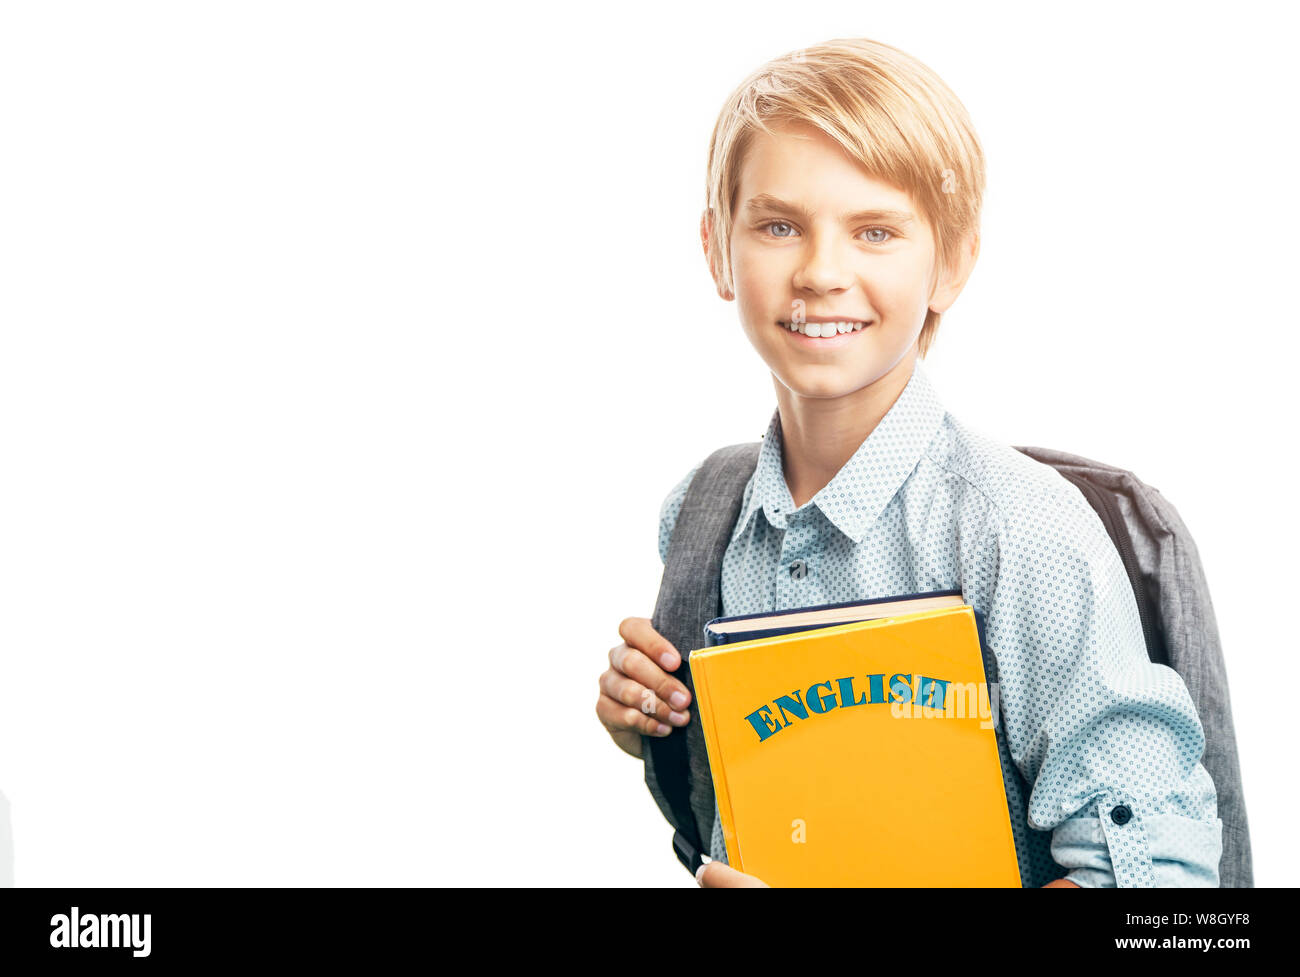 A smiling English student with a schoolbag and books lit by Sun Stock Photo